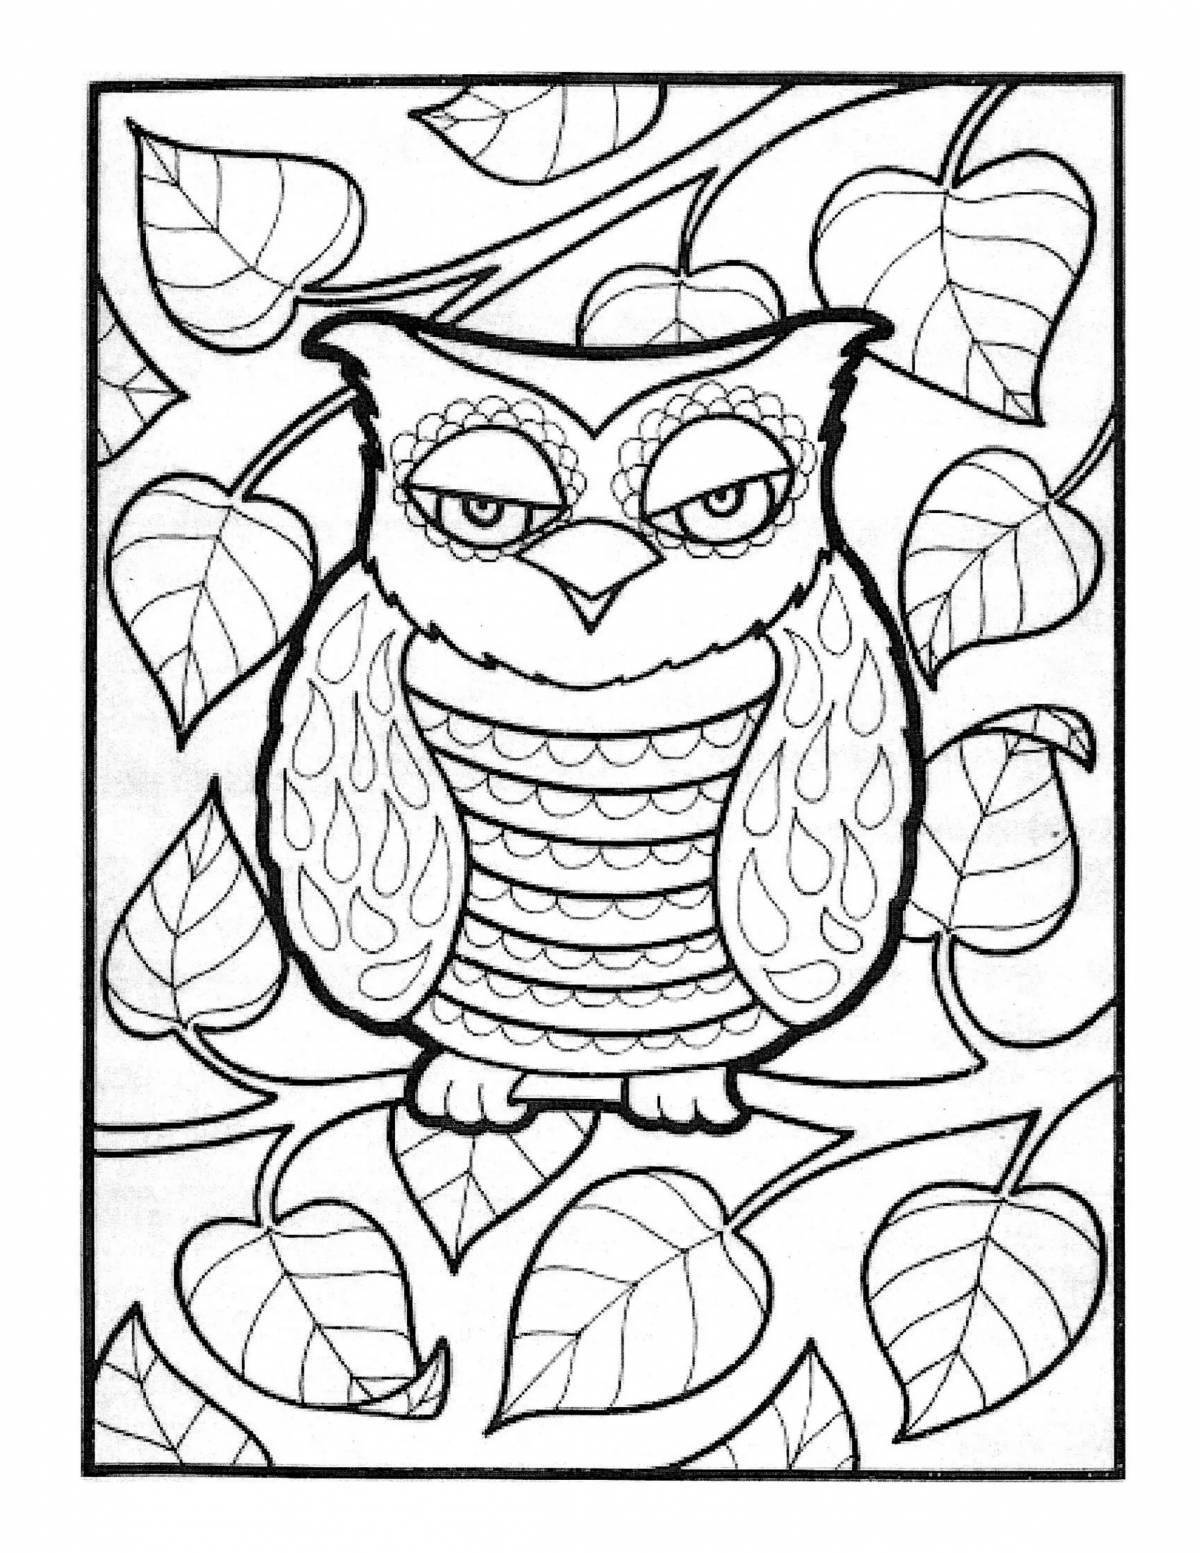 Large wise owl coloring book for children